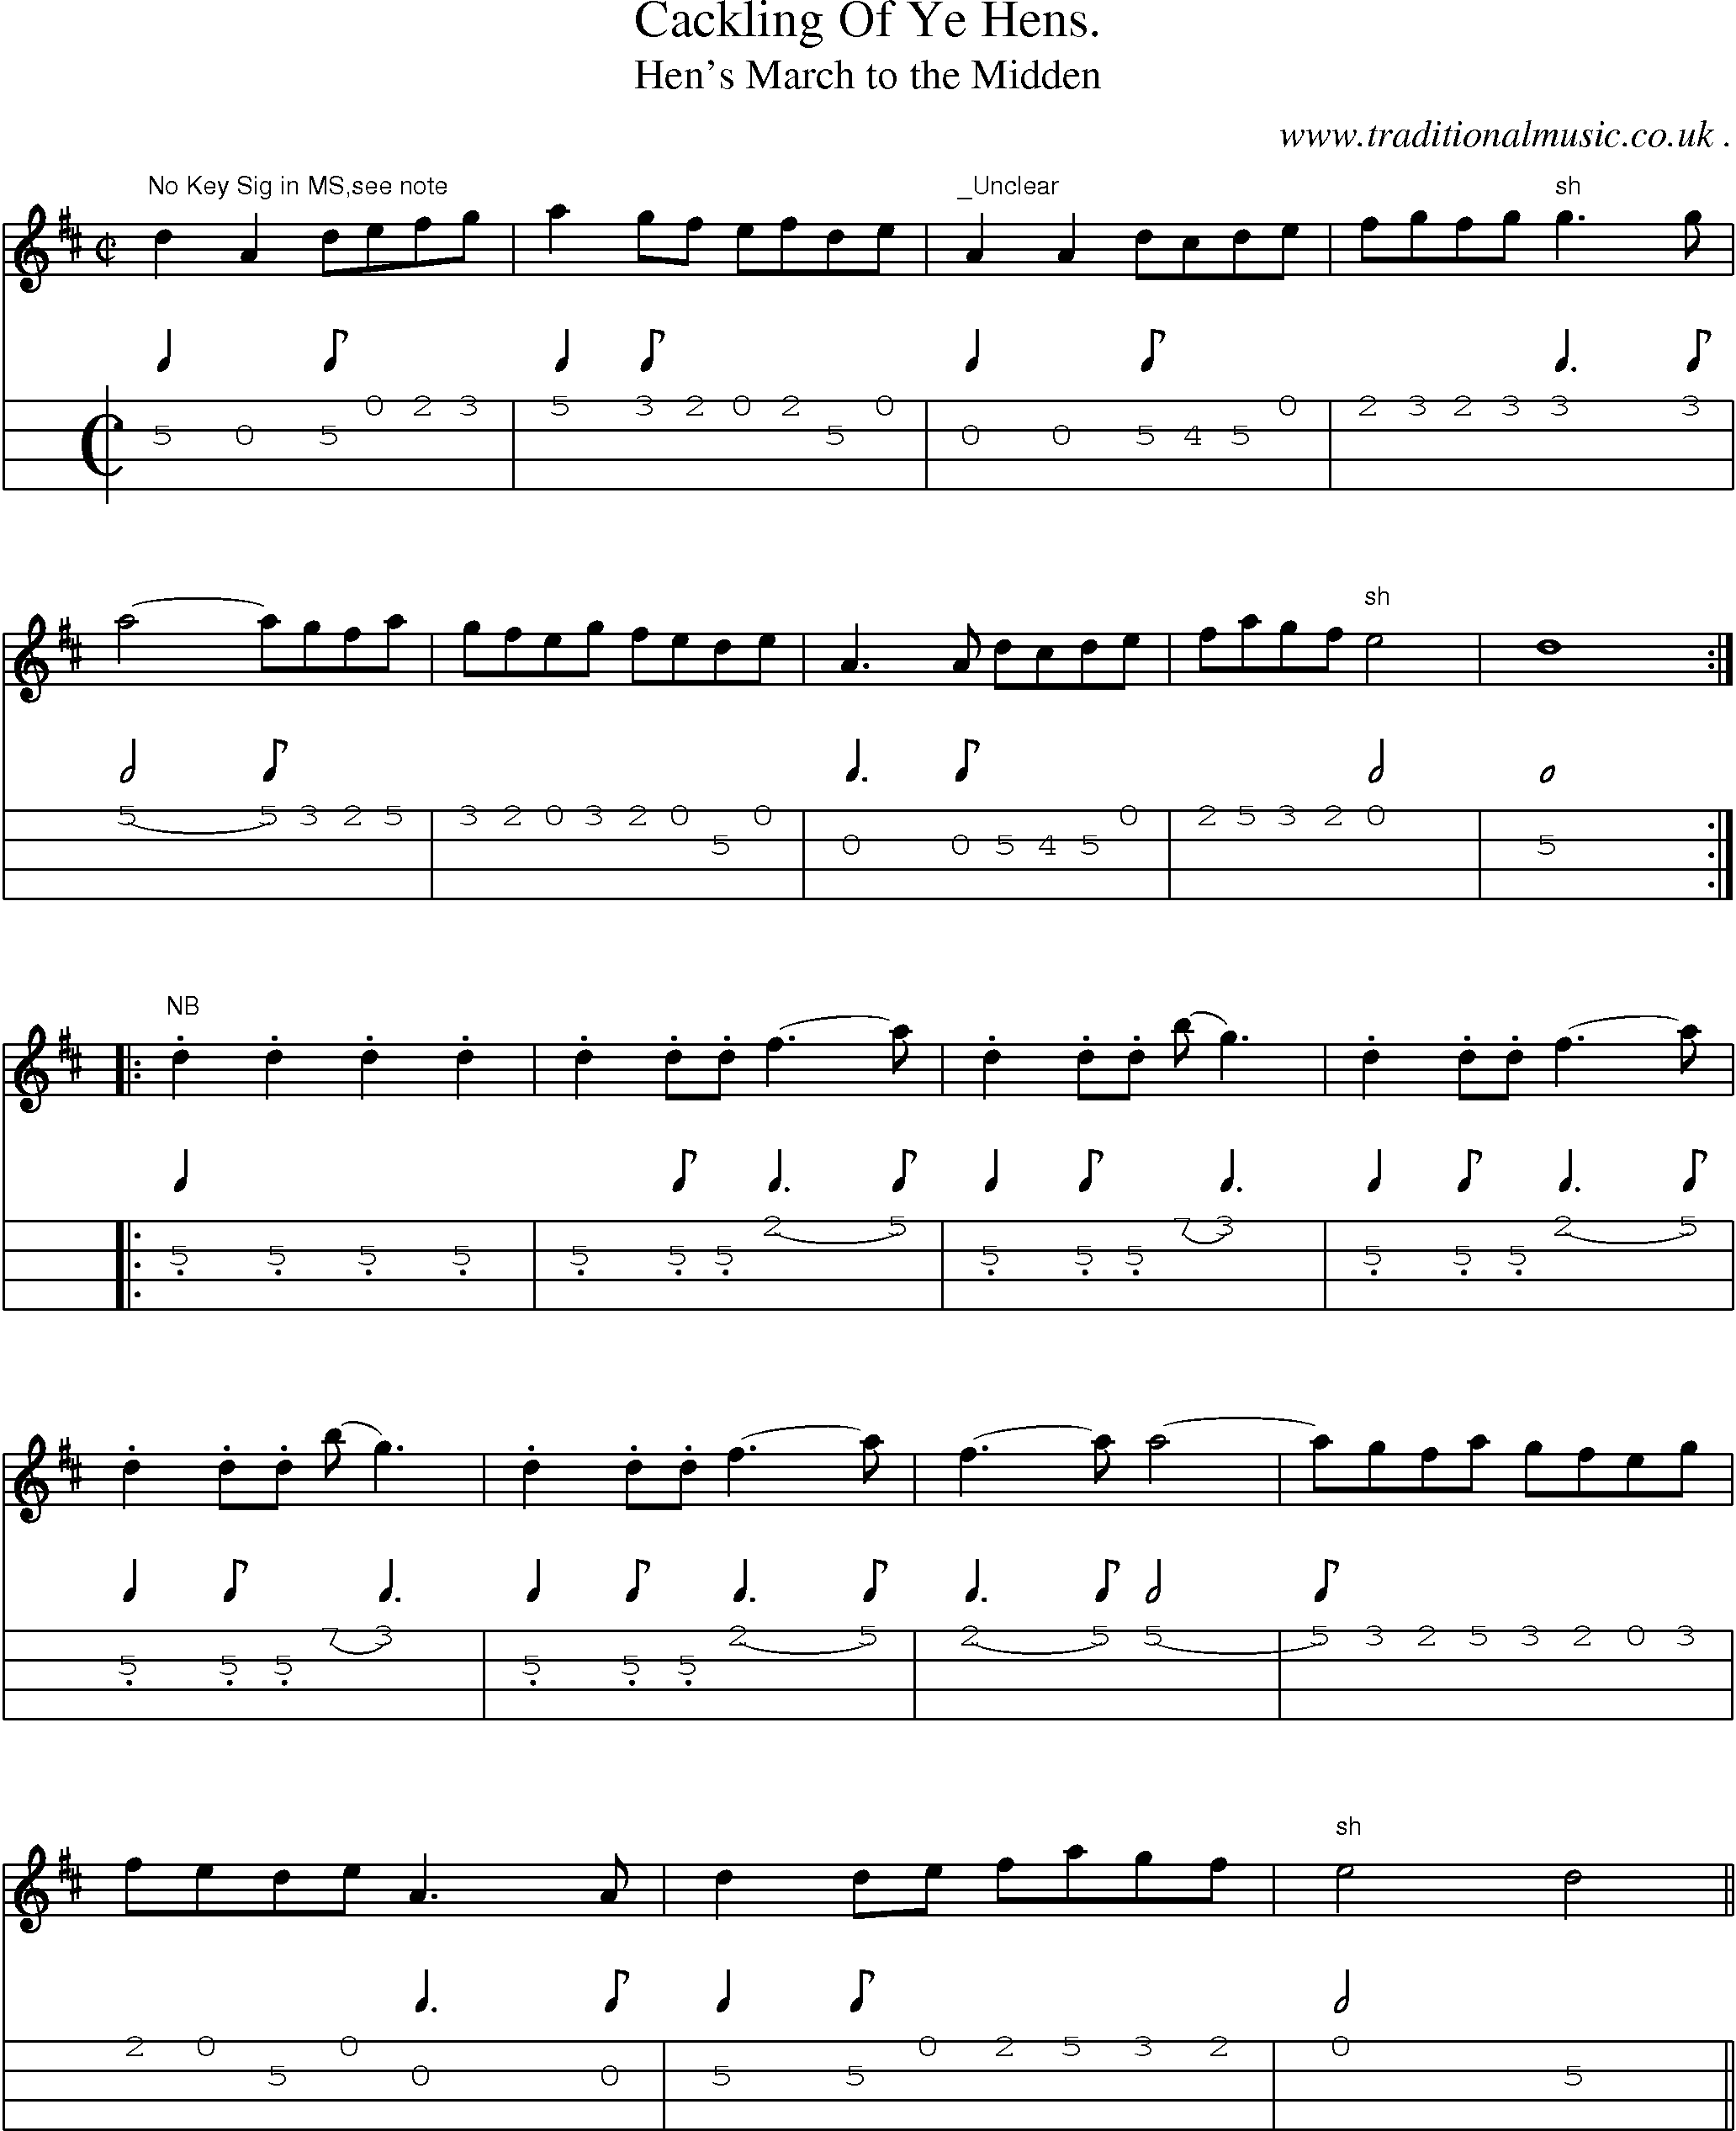 Sheet-Music and Mandolin Tabs for Cackling Of Ye Hens